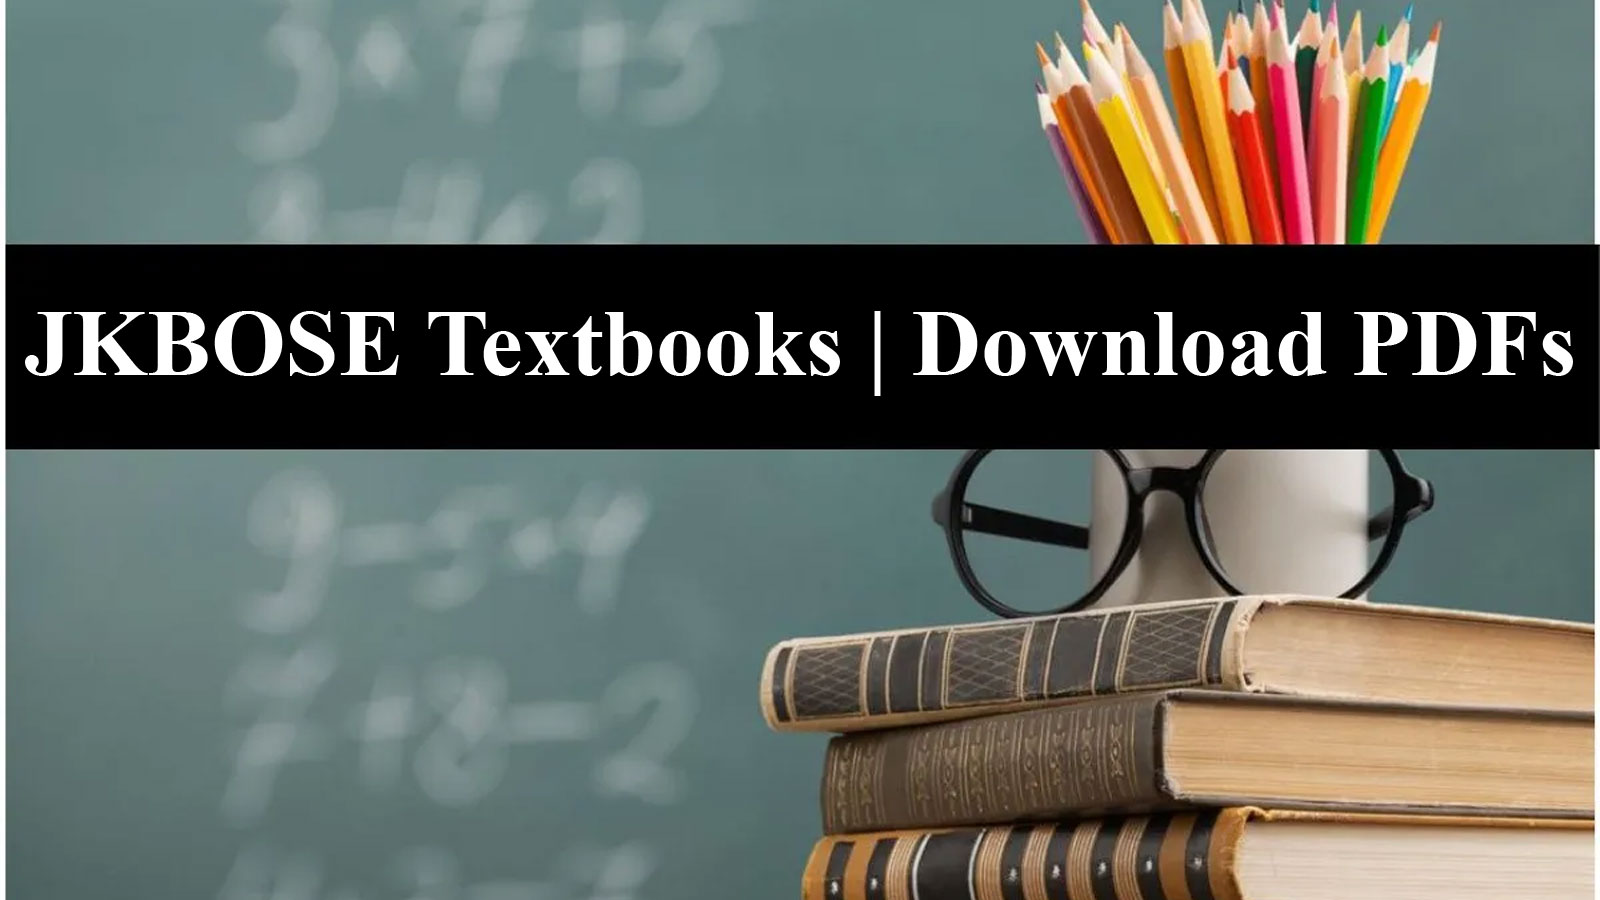 JKBOSE Class 6th Textbooks; Direct Link to Download PDFs